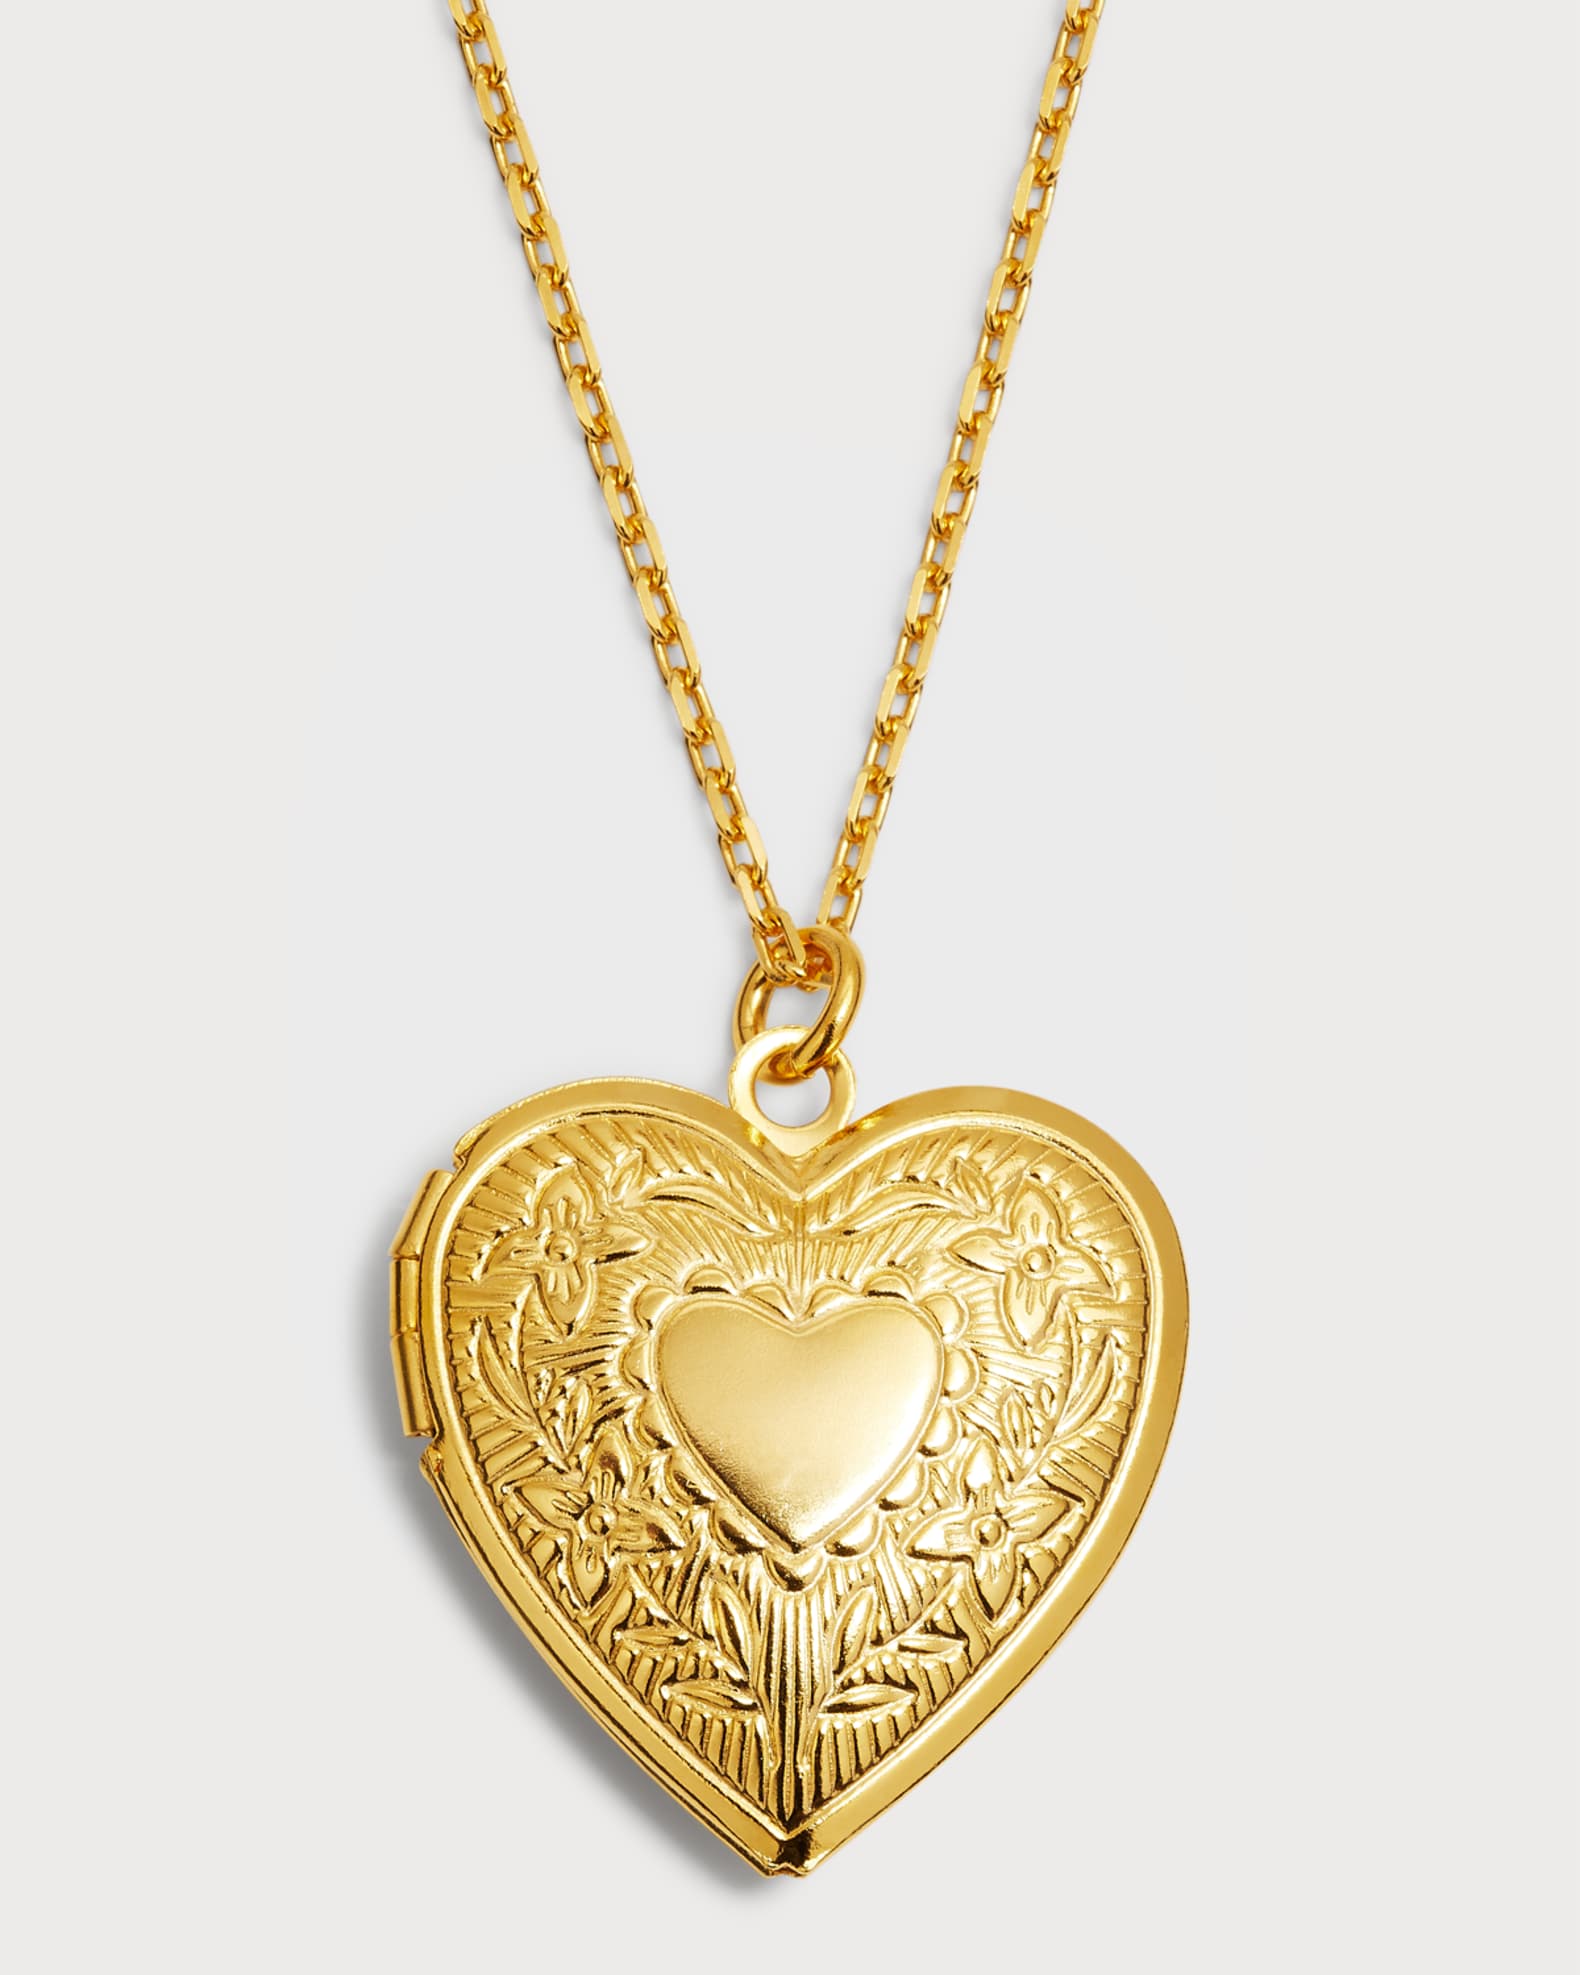 Golden Goose - Necklace in Antique Gold Color with Heart Charms, Woman, Size: U